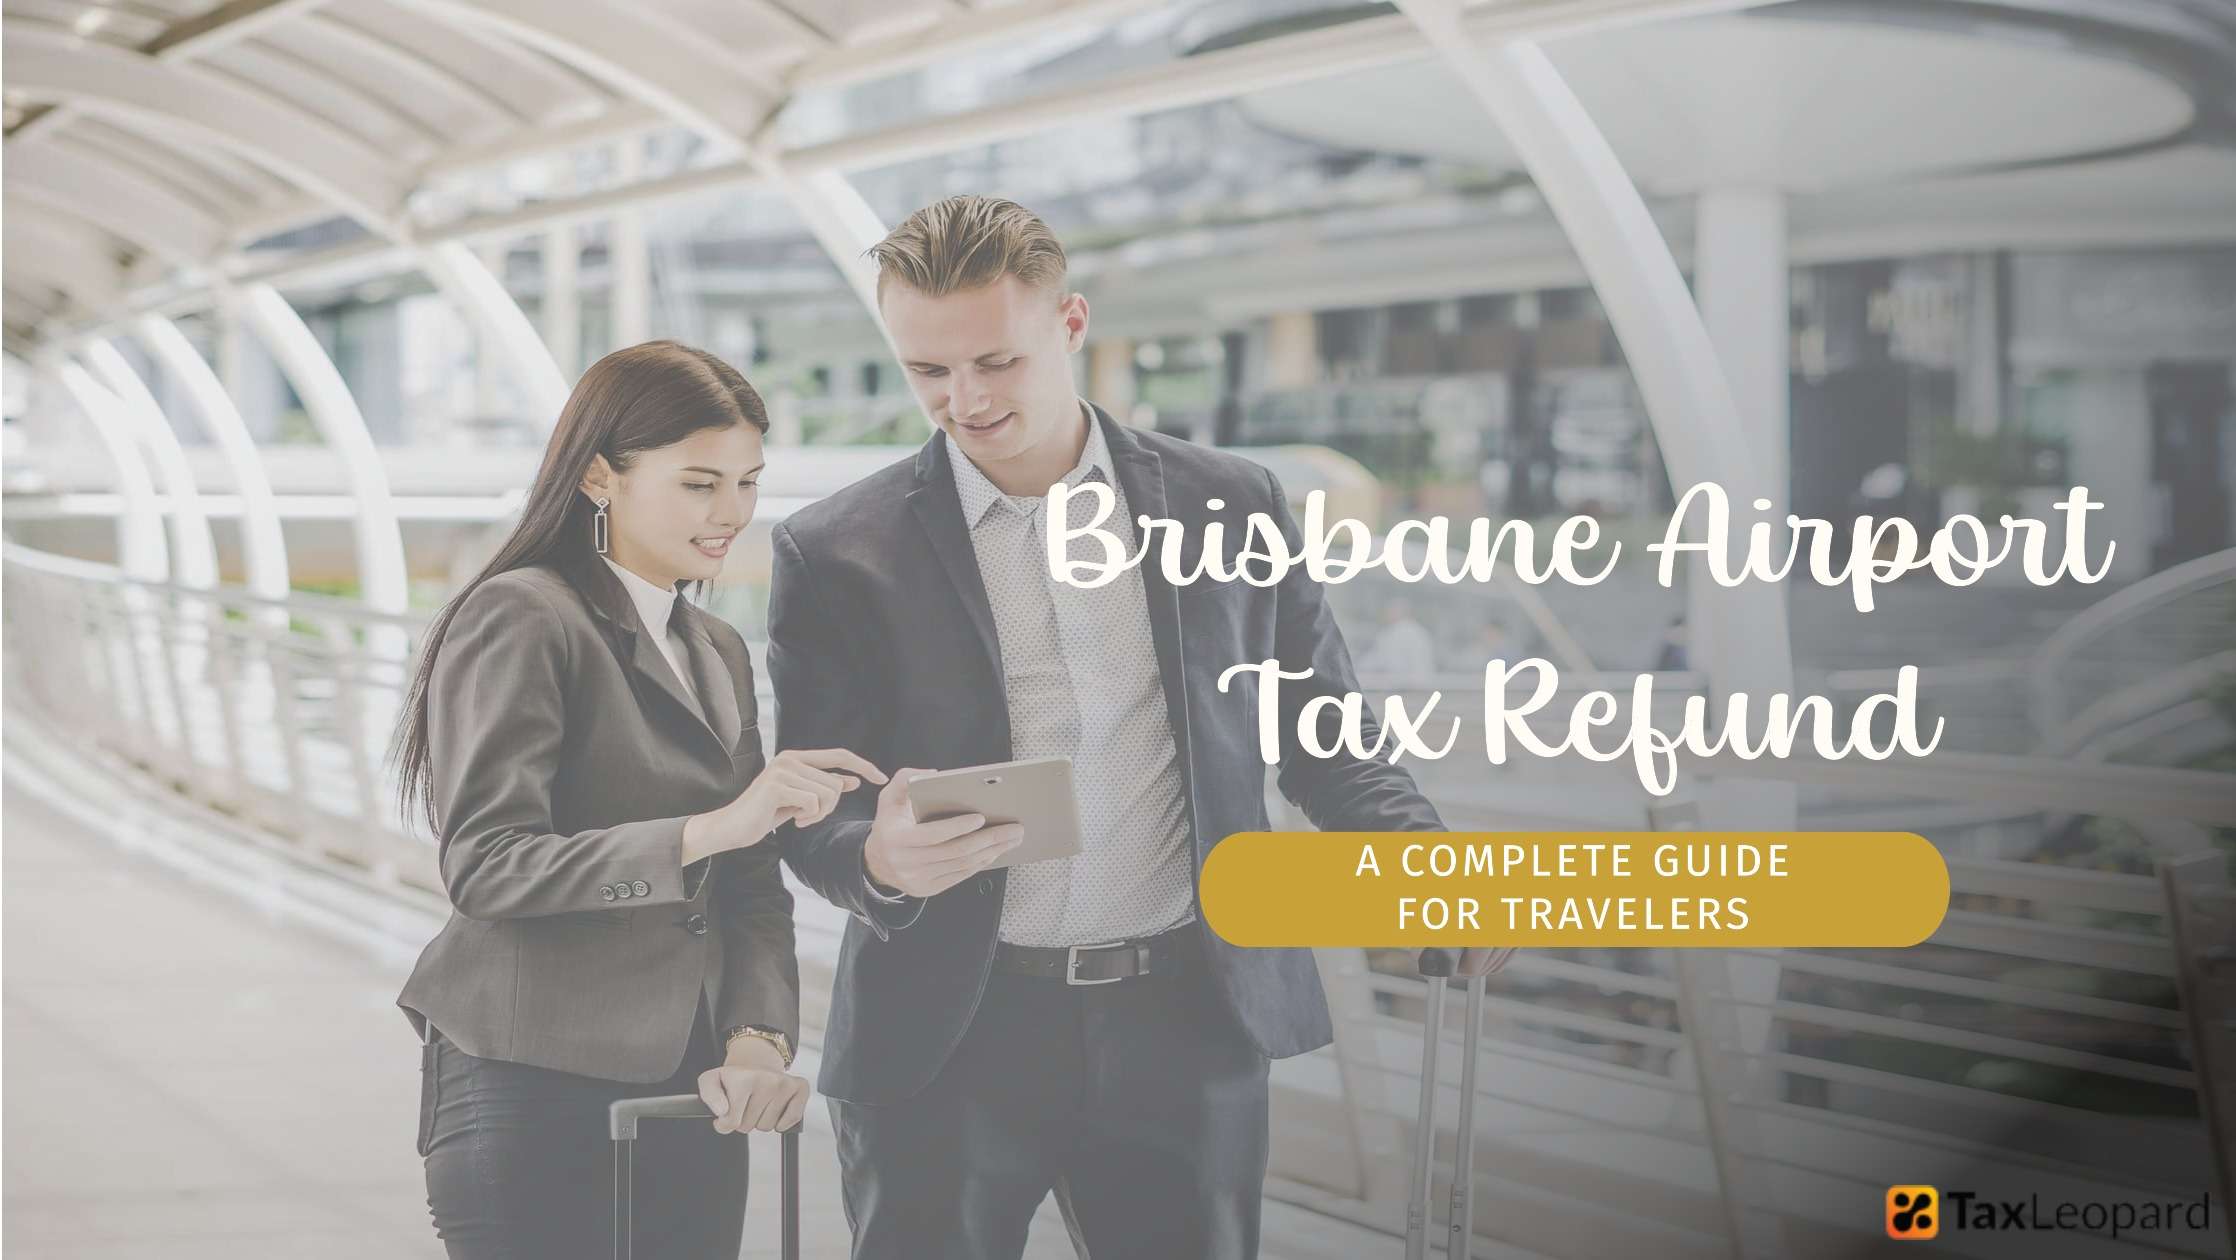 Brisbane Airport Tax Refund: A Complete Guide For Travelers